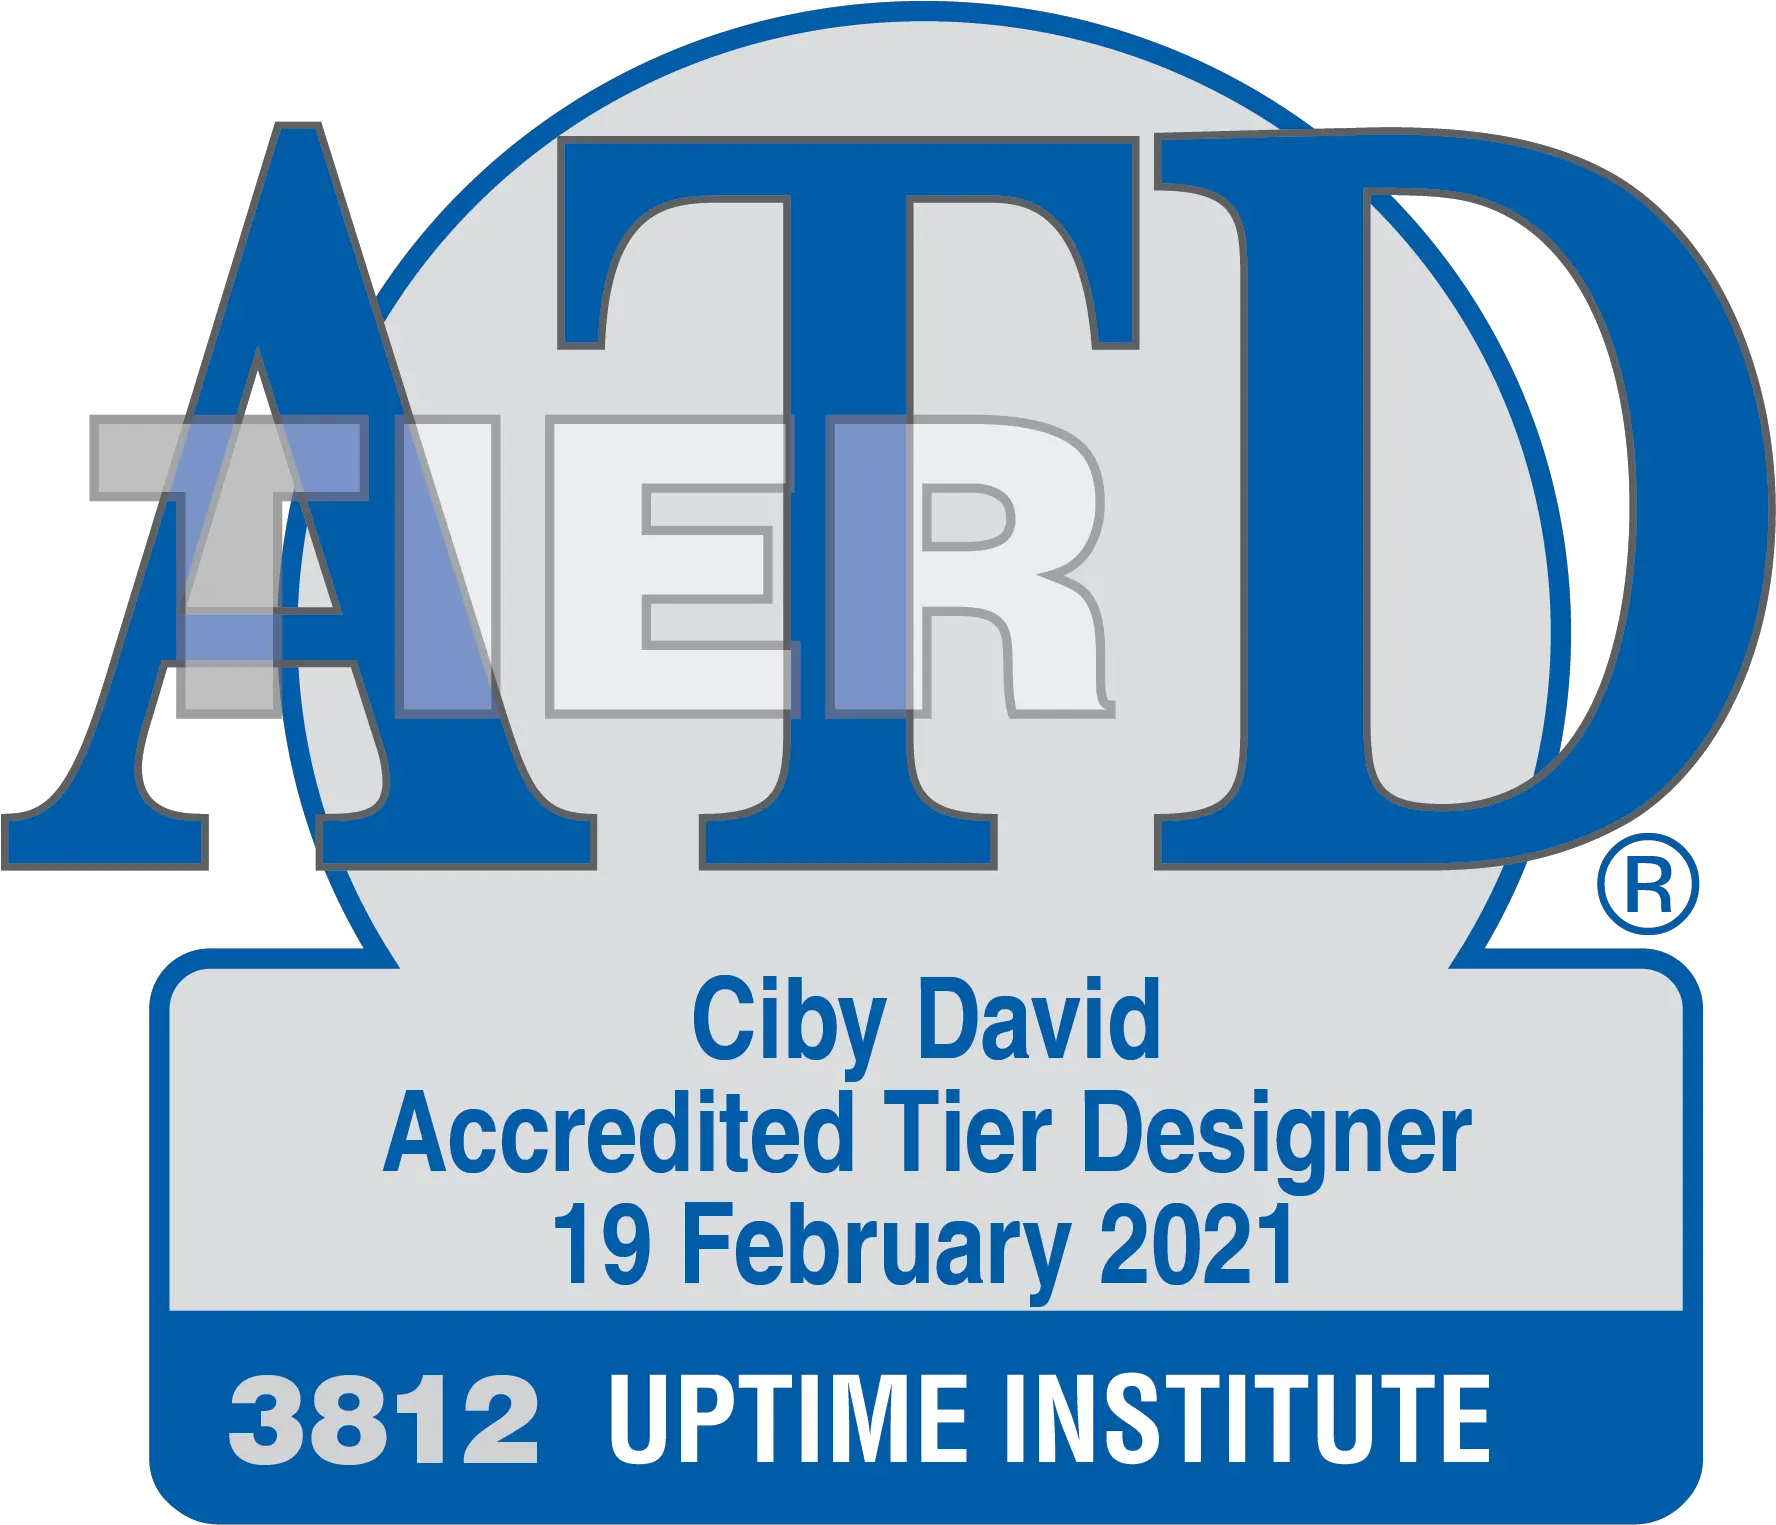 Atd Roster Uptime Institute Uptime Institute Png Doo The Icon Of Sin